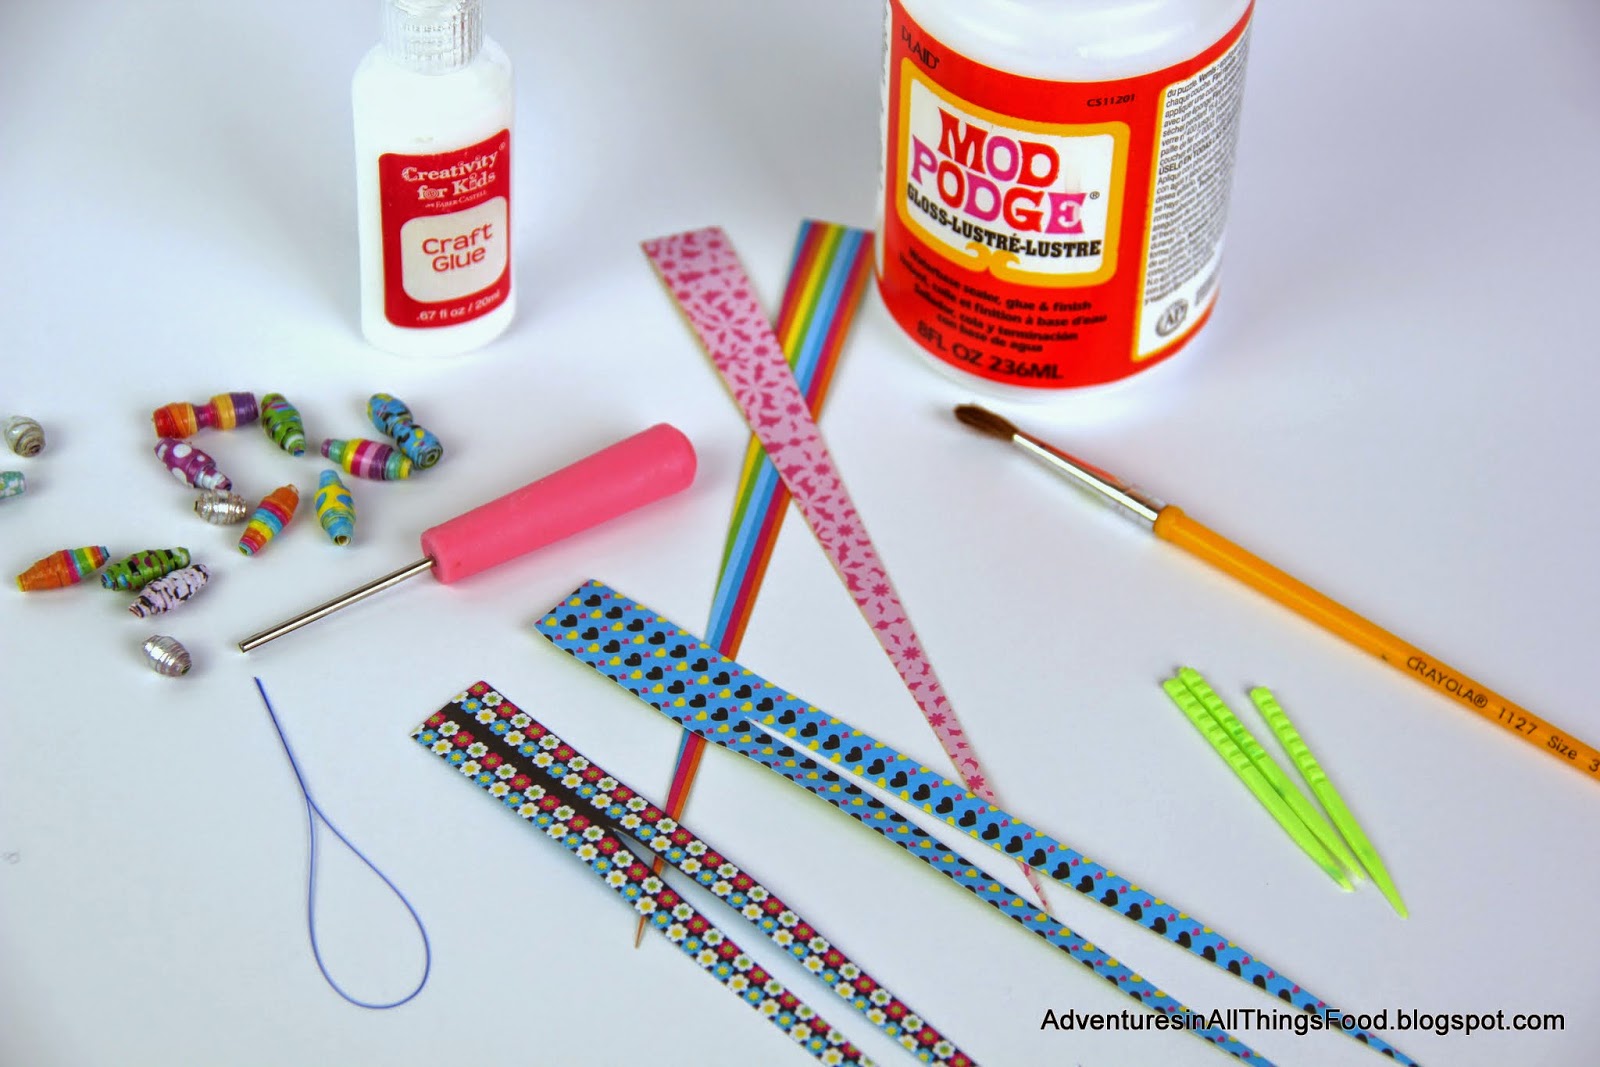 Two Ways to Glaze a Paper Bead - Paper Bead Rollers